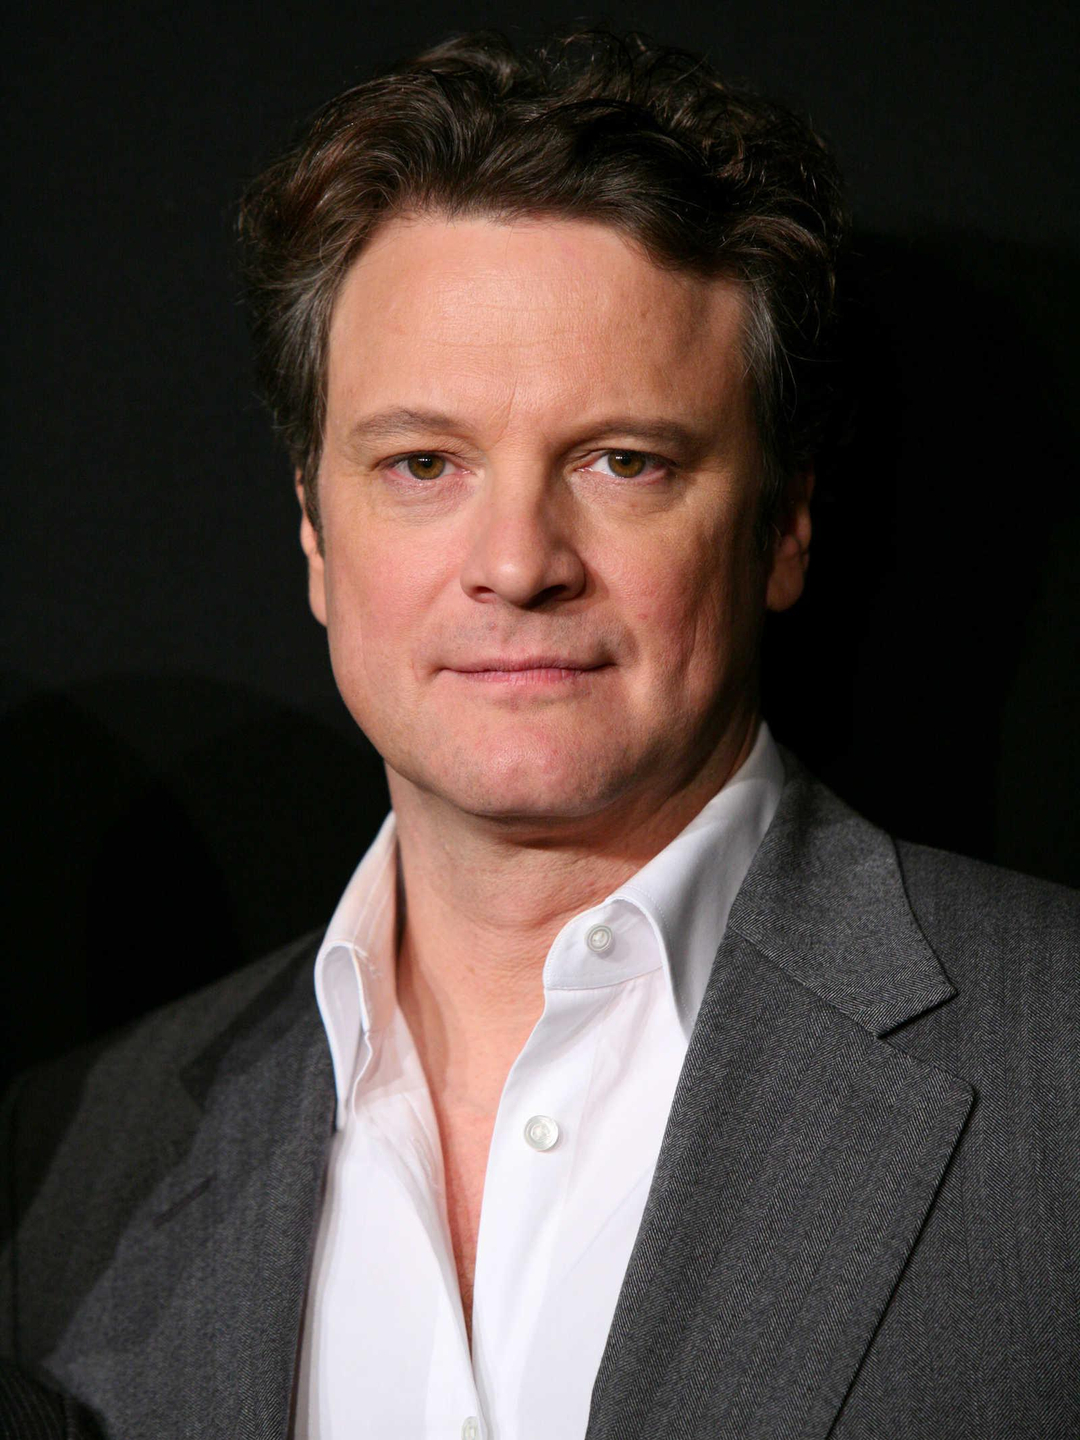 Colin Firth who is he